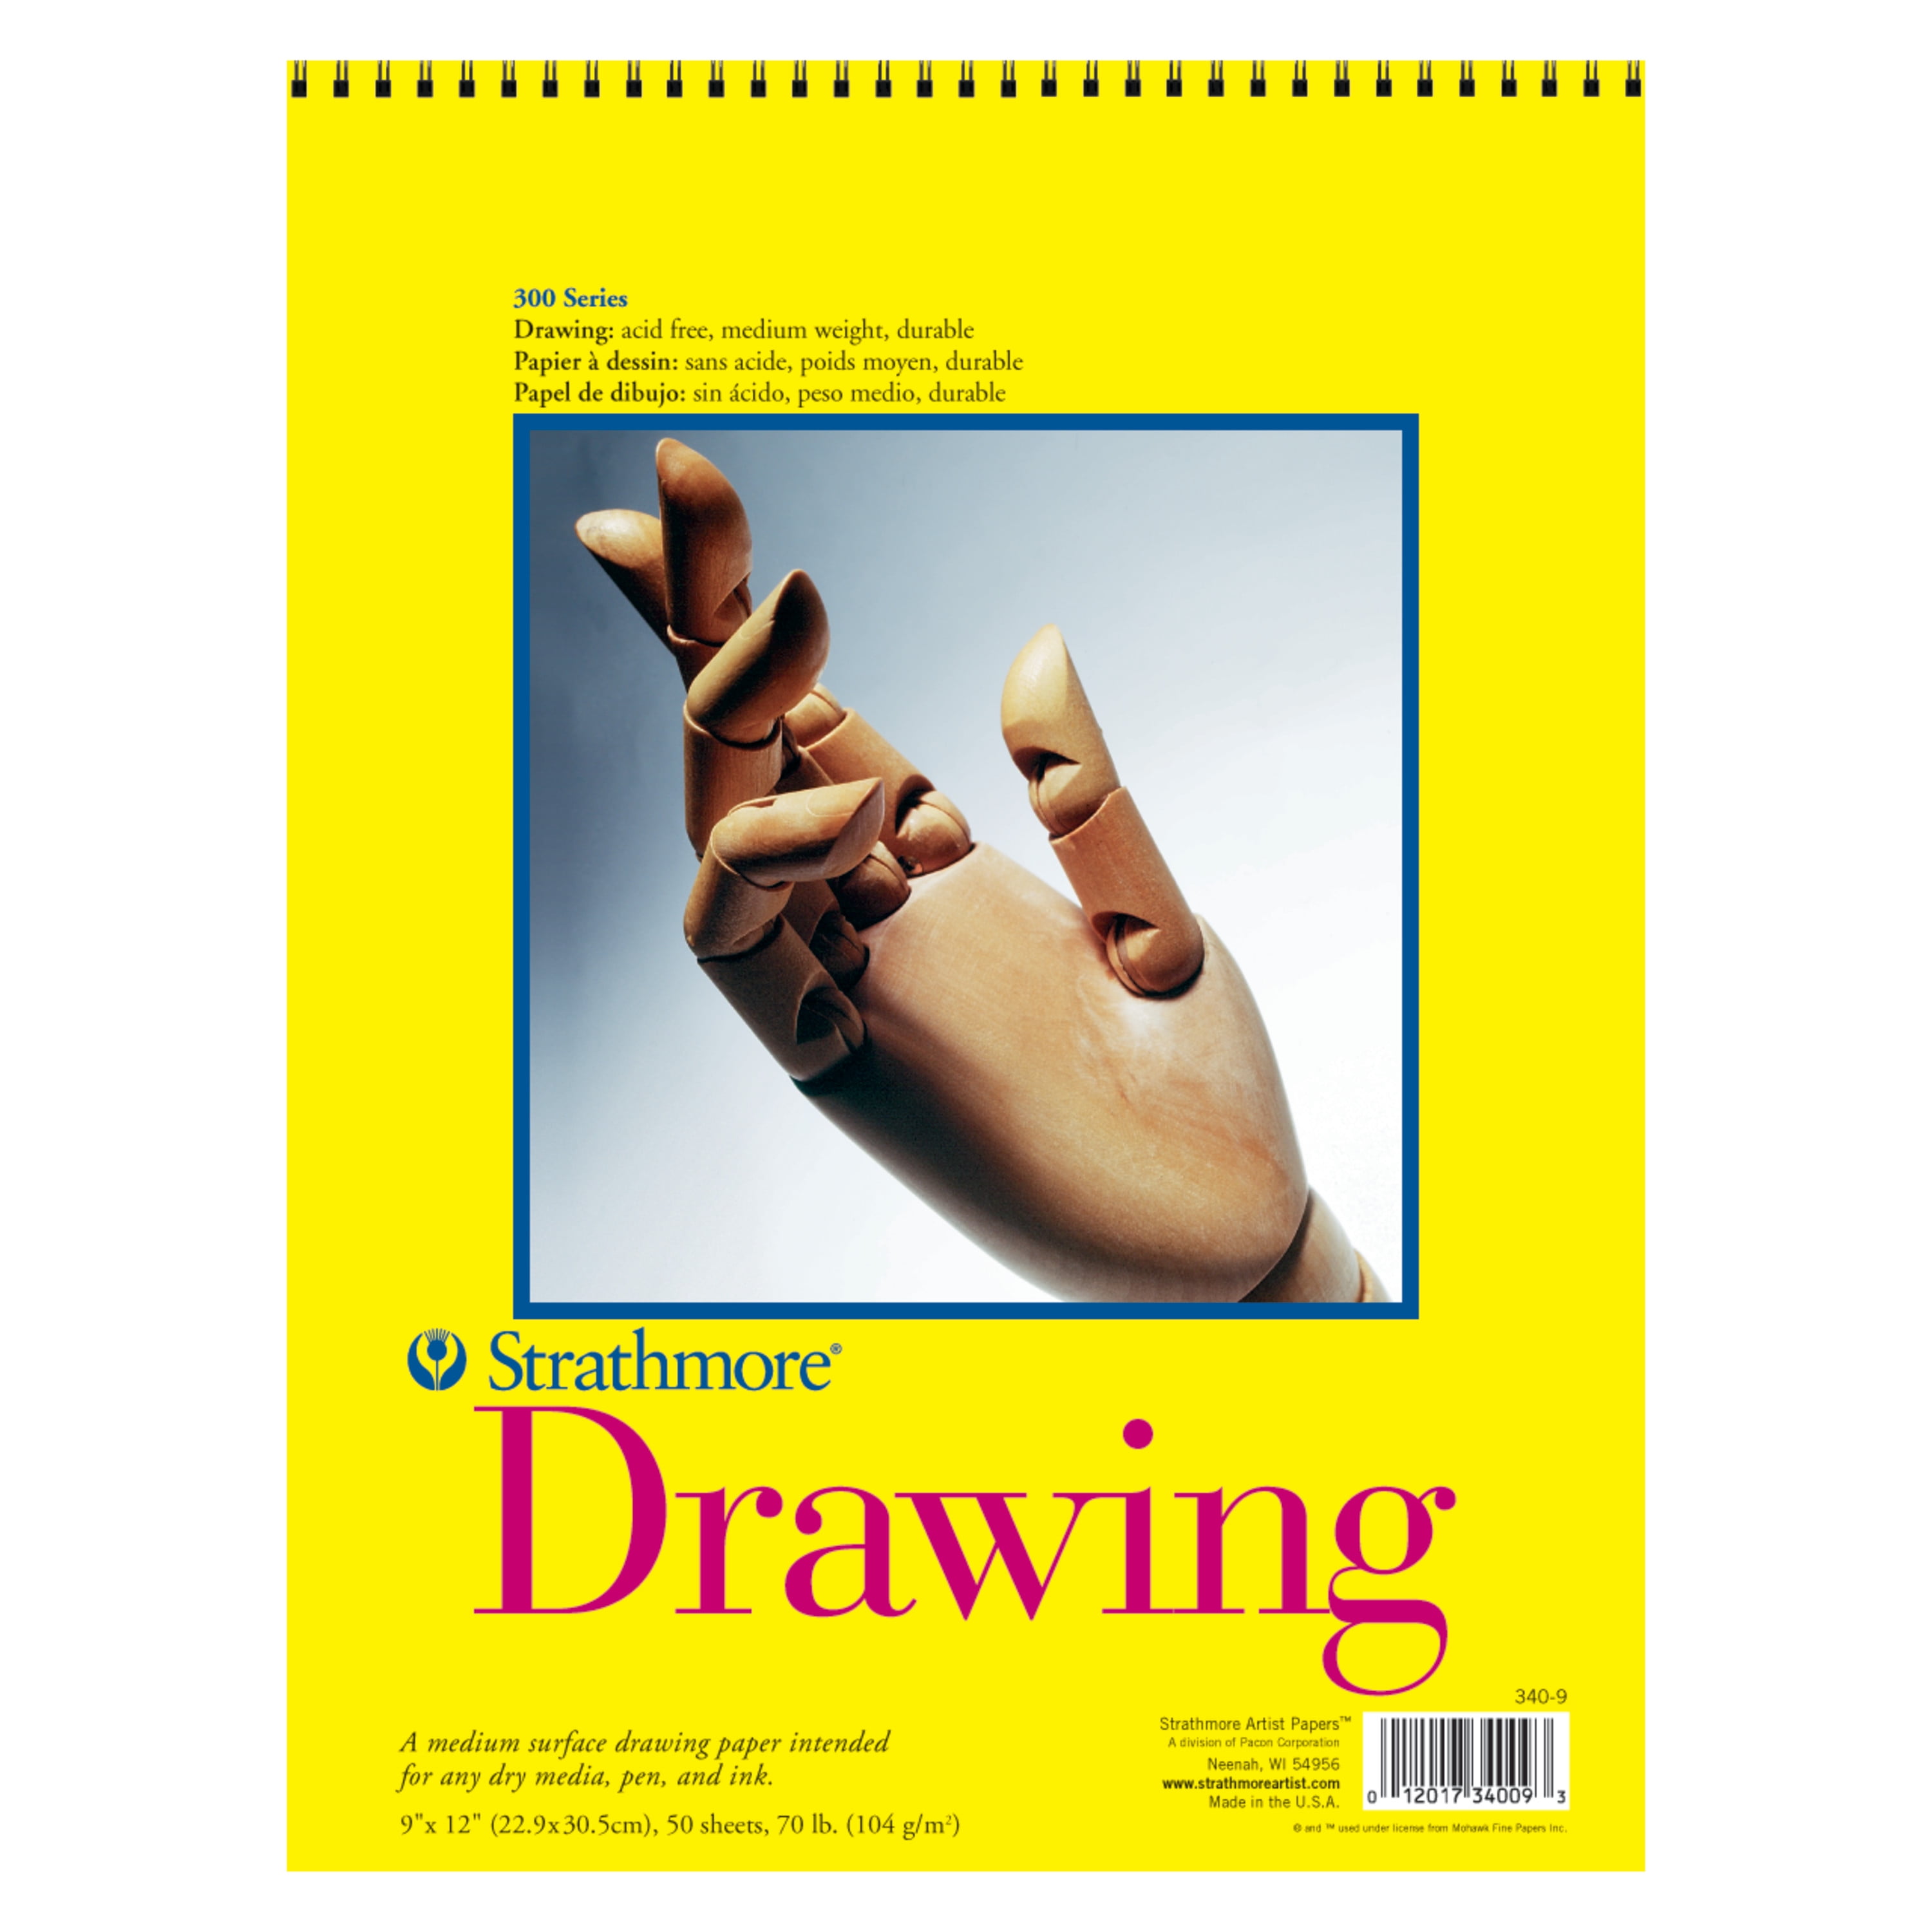 Strathmore 300 Series Drawing Pad, 9 x 12 Inches, 70 lb, 50 Sheets